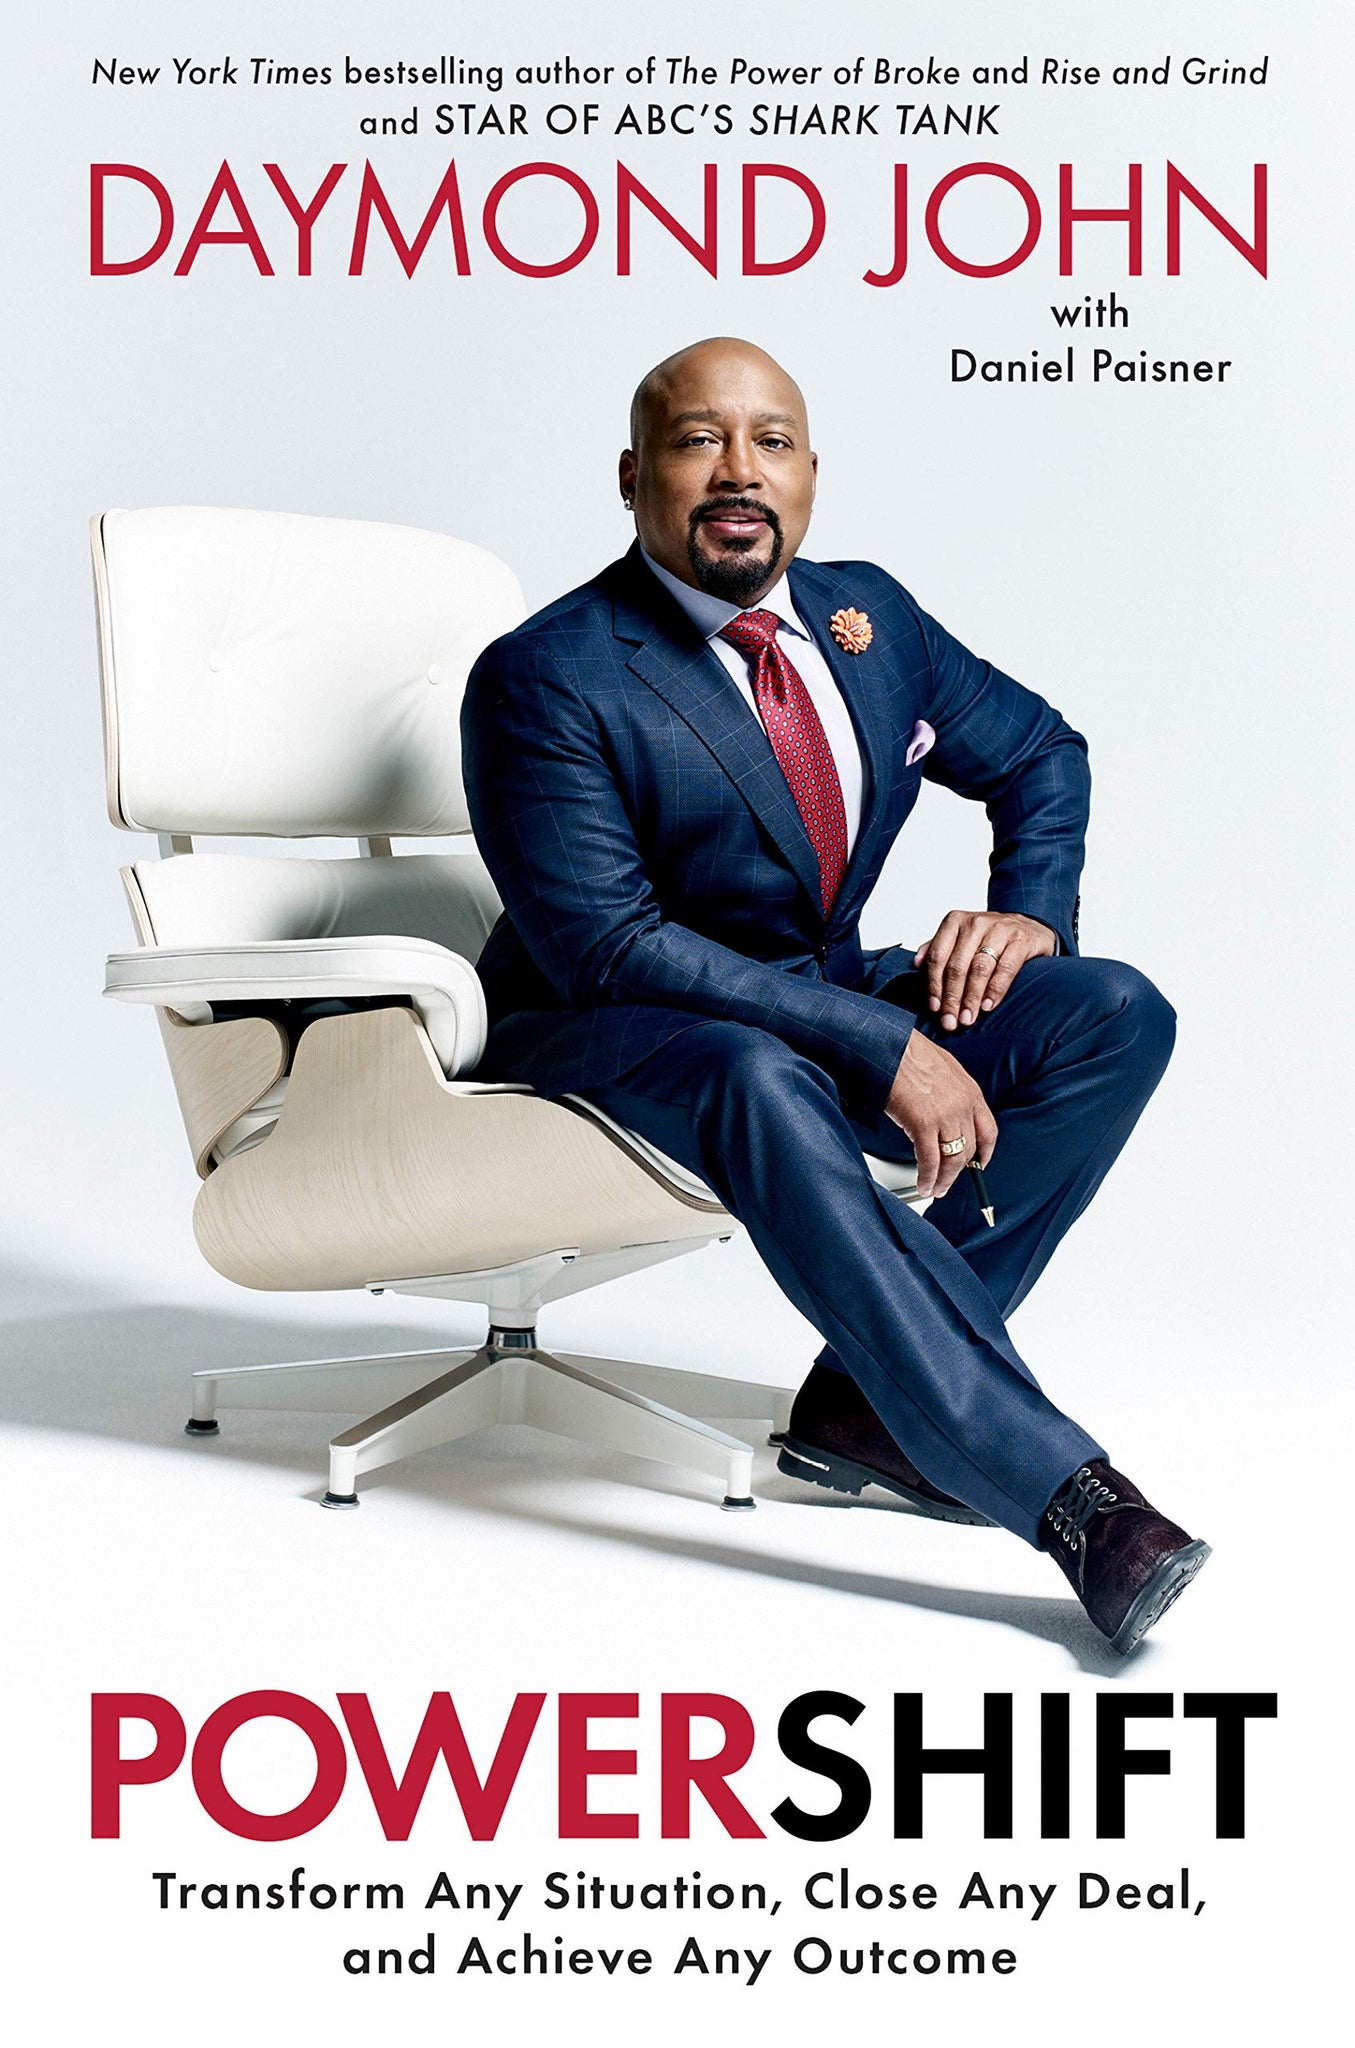 Powershift: How to Master the Three Prongs of Influence to Close Any Deal and Achieve Any Outcome by Daymond John